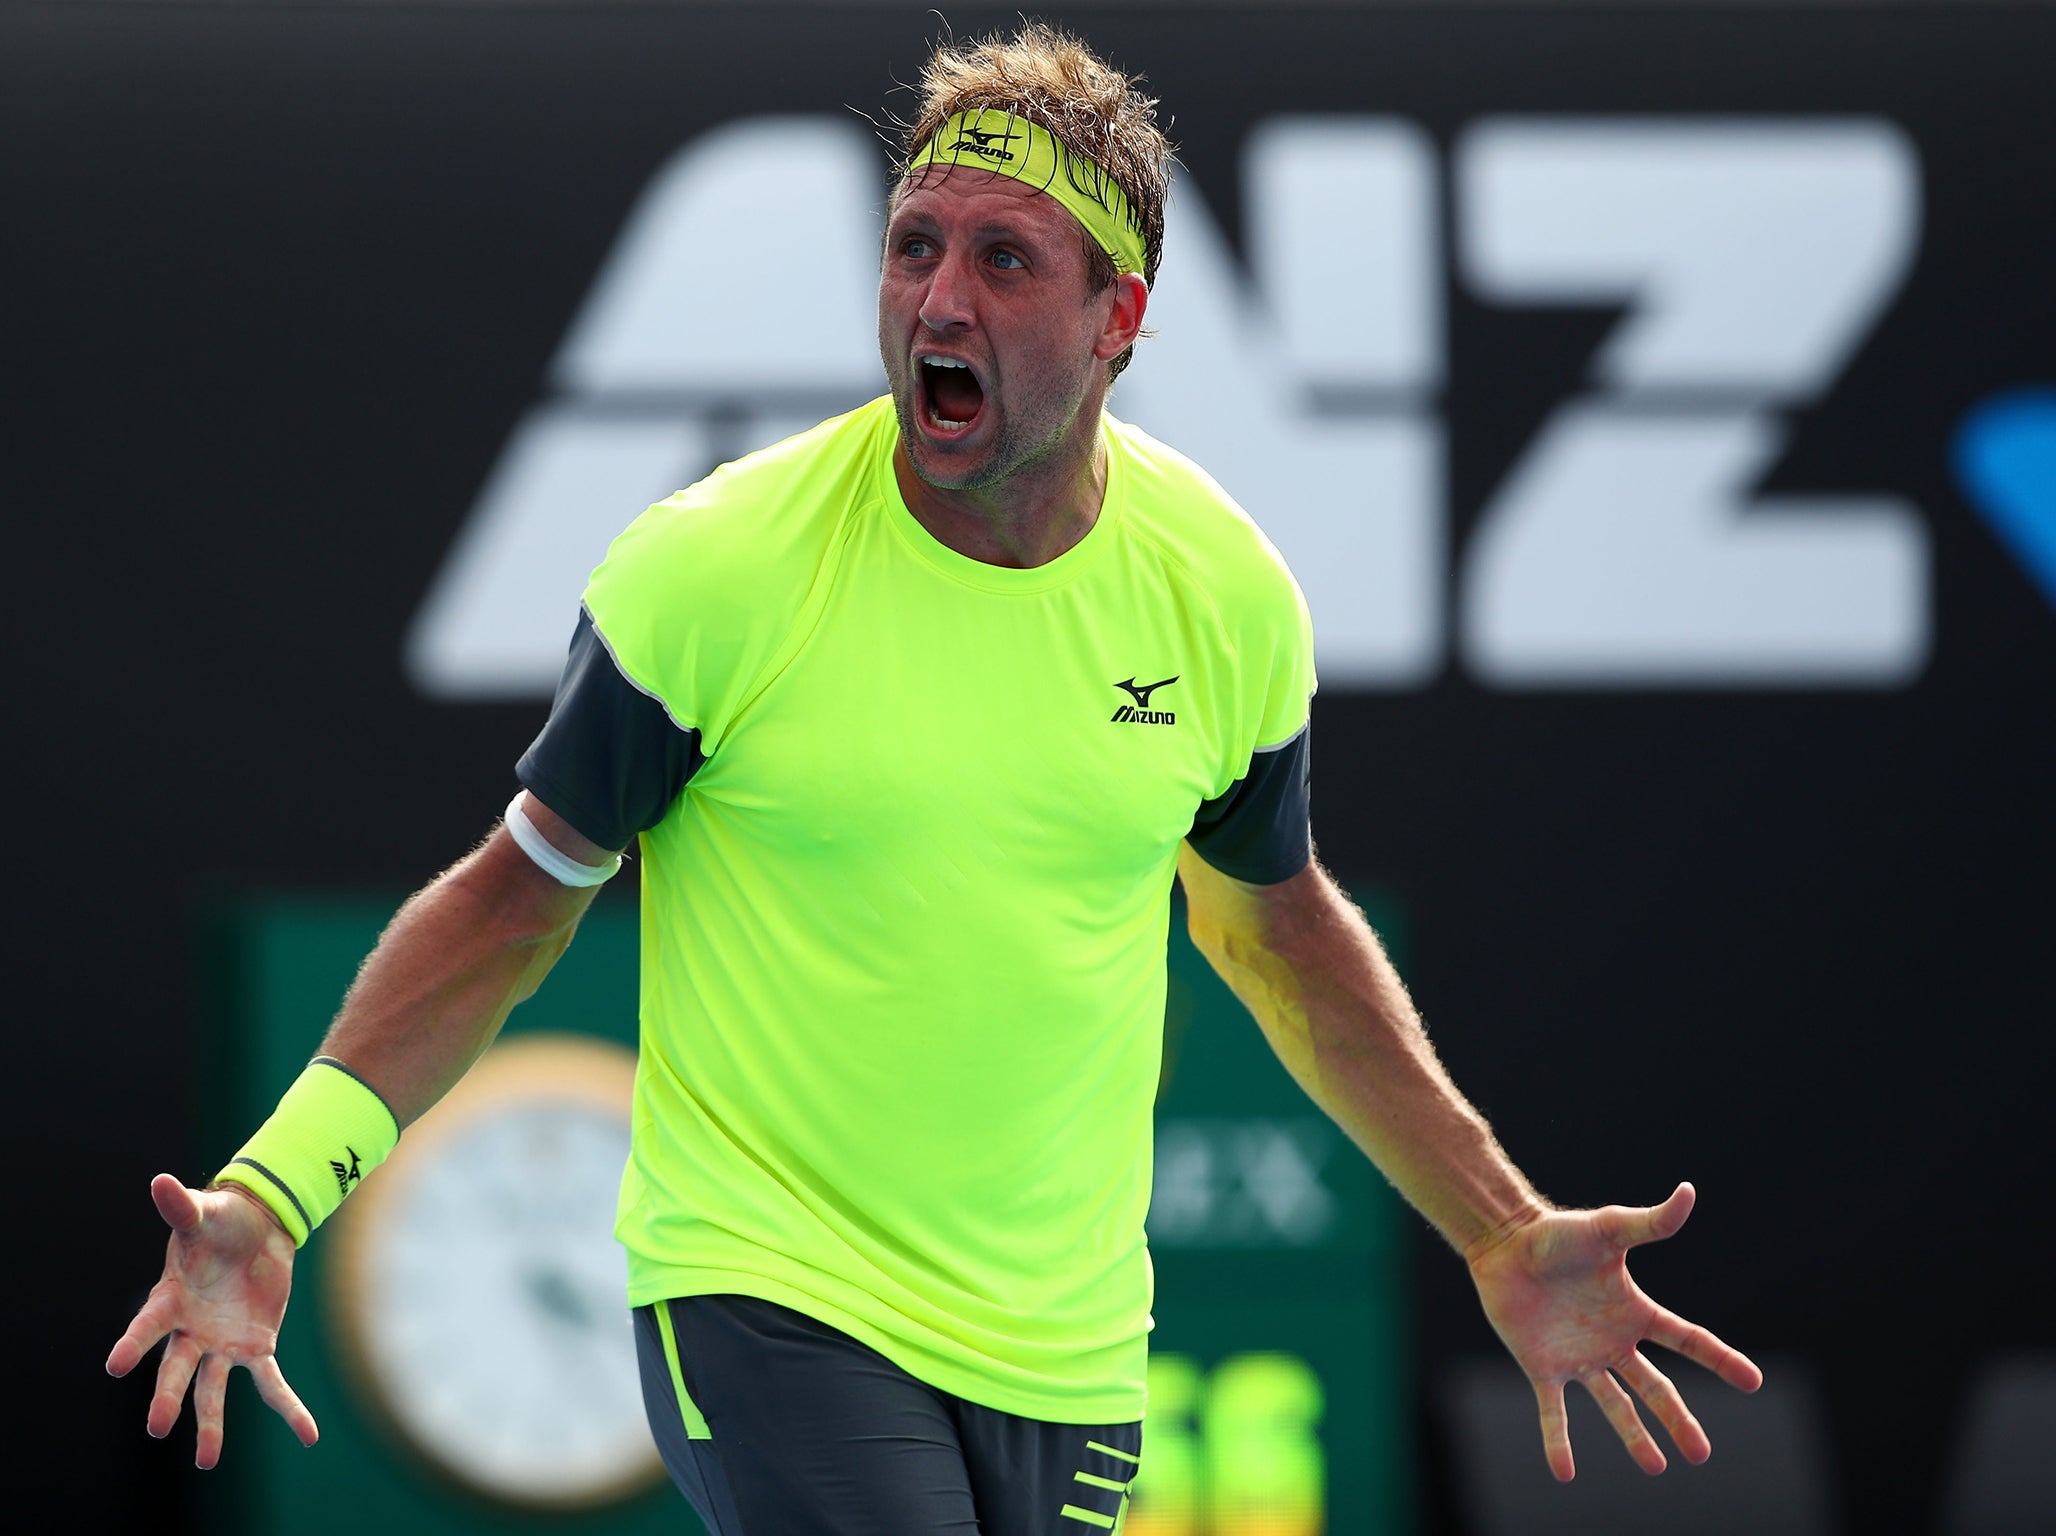 Sandgren has accused the press of stripping away his individuality